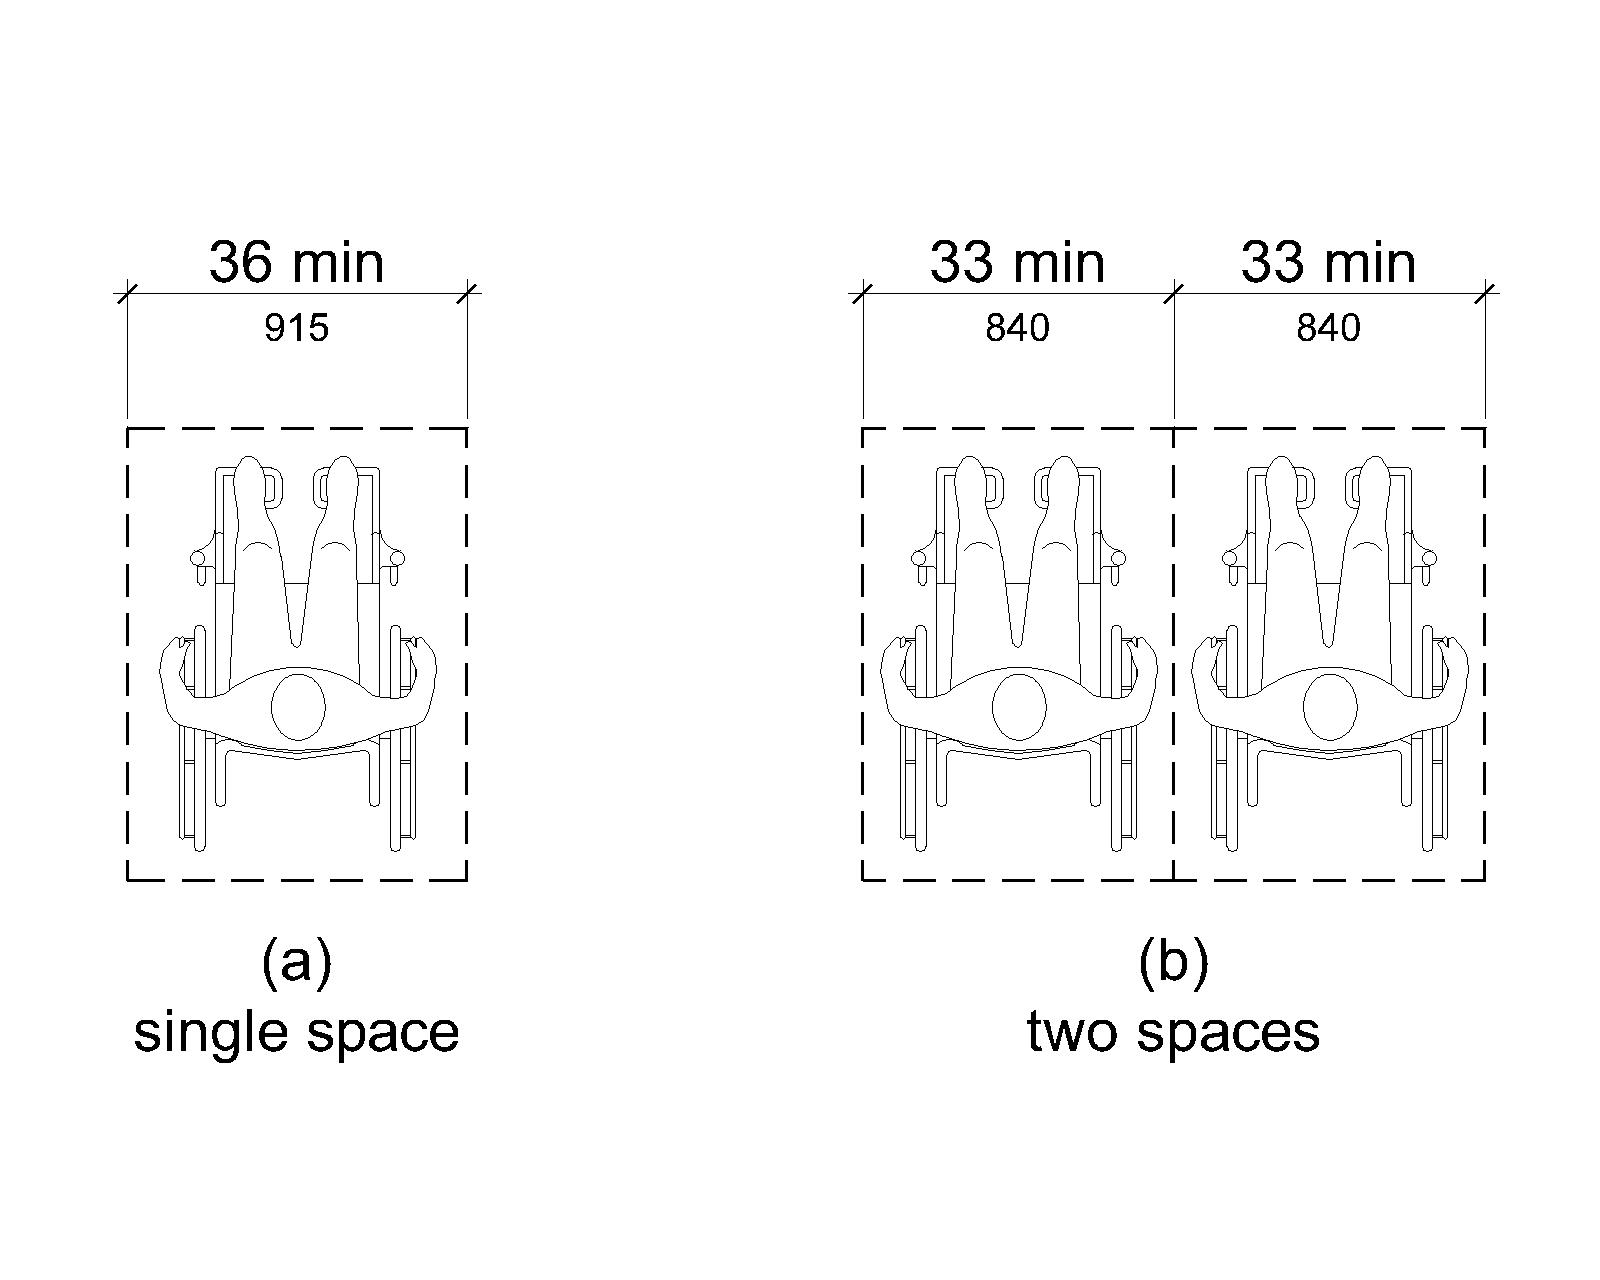 Figure (a) is a plan view of a single wheelchair space 36 inches (915 mm) wide minimum.Figure (b) is a plan view of two wheelchair spaces side by side.Each space is 33 inches (840 mm) wide minimum.